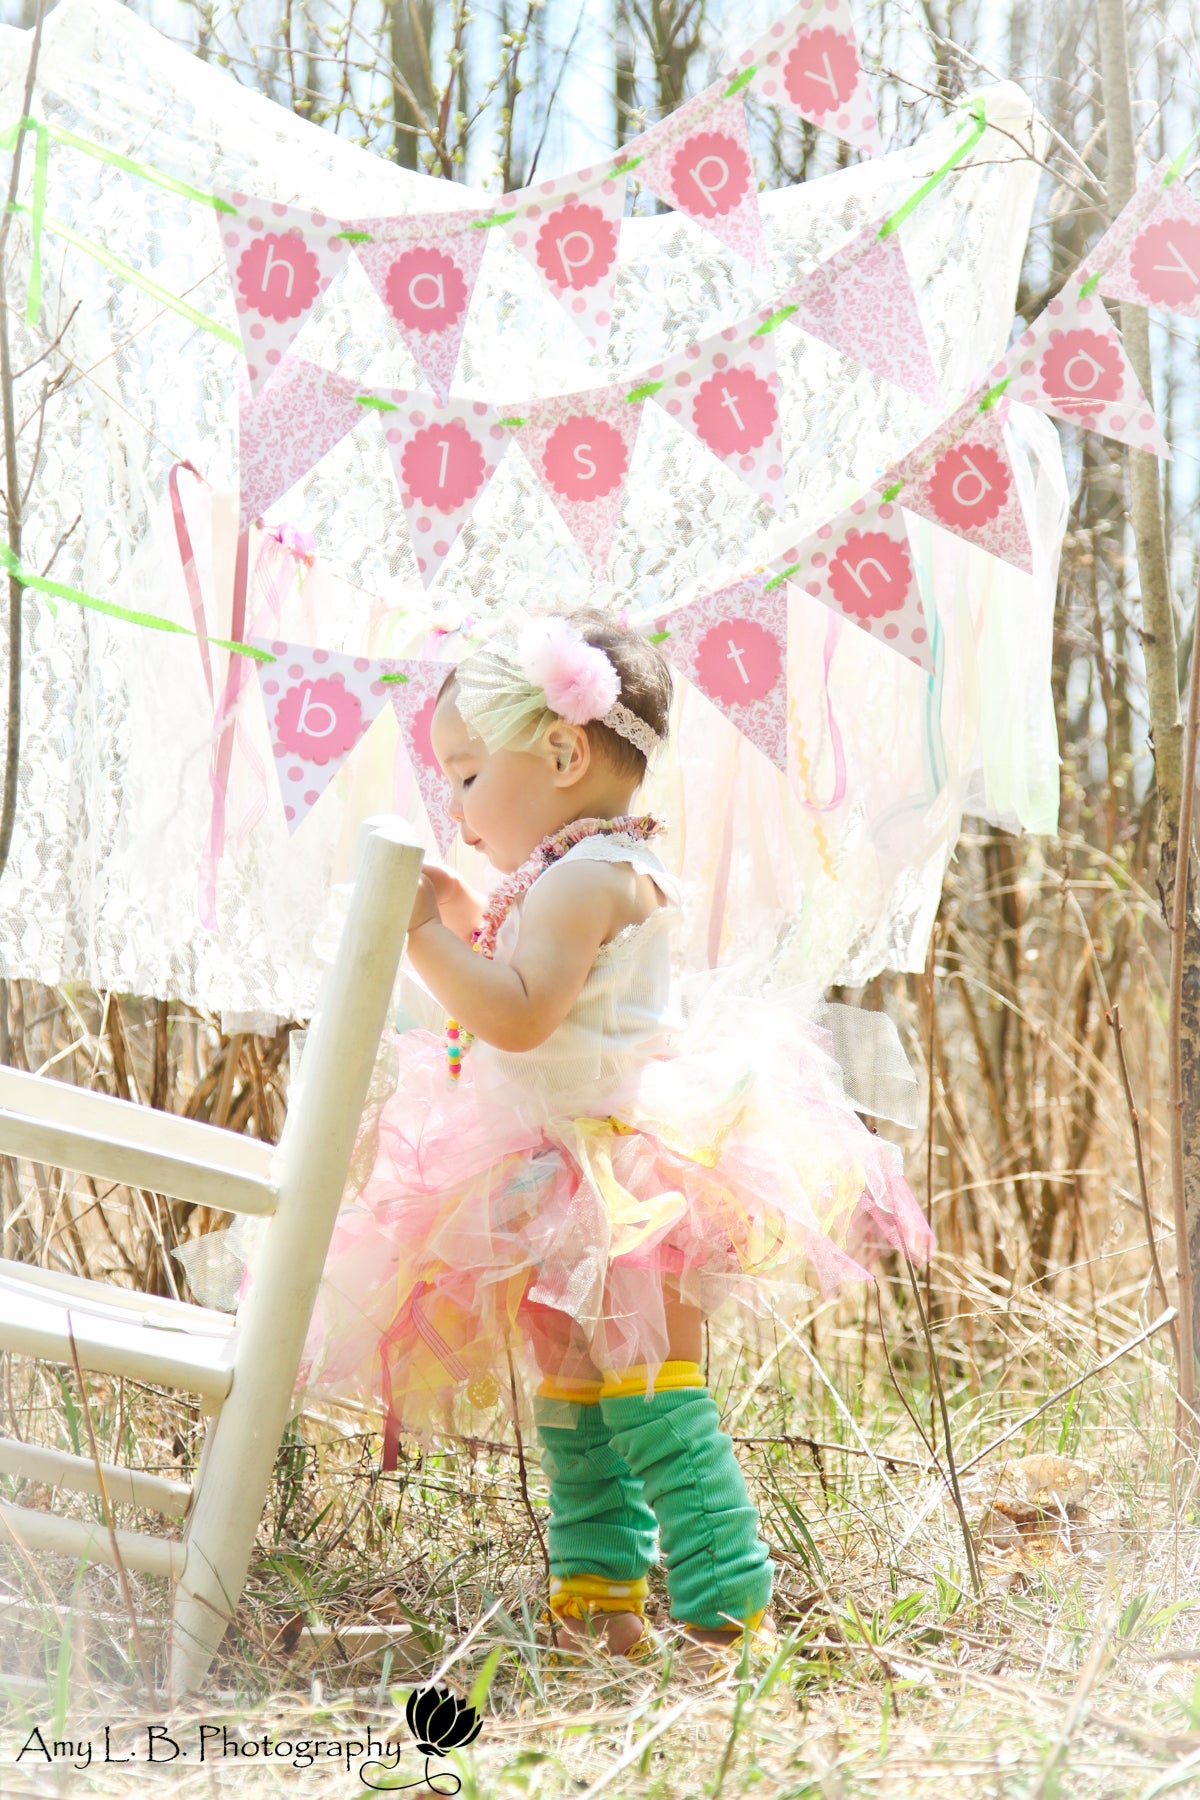 Asian baby girl in a tutu standing in front of a flag banner that says "happy 1st birthday."